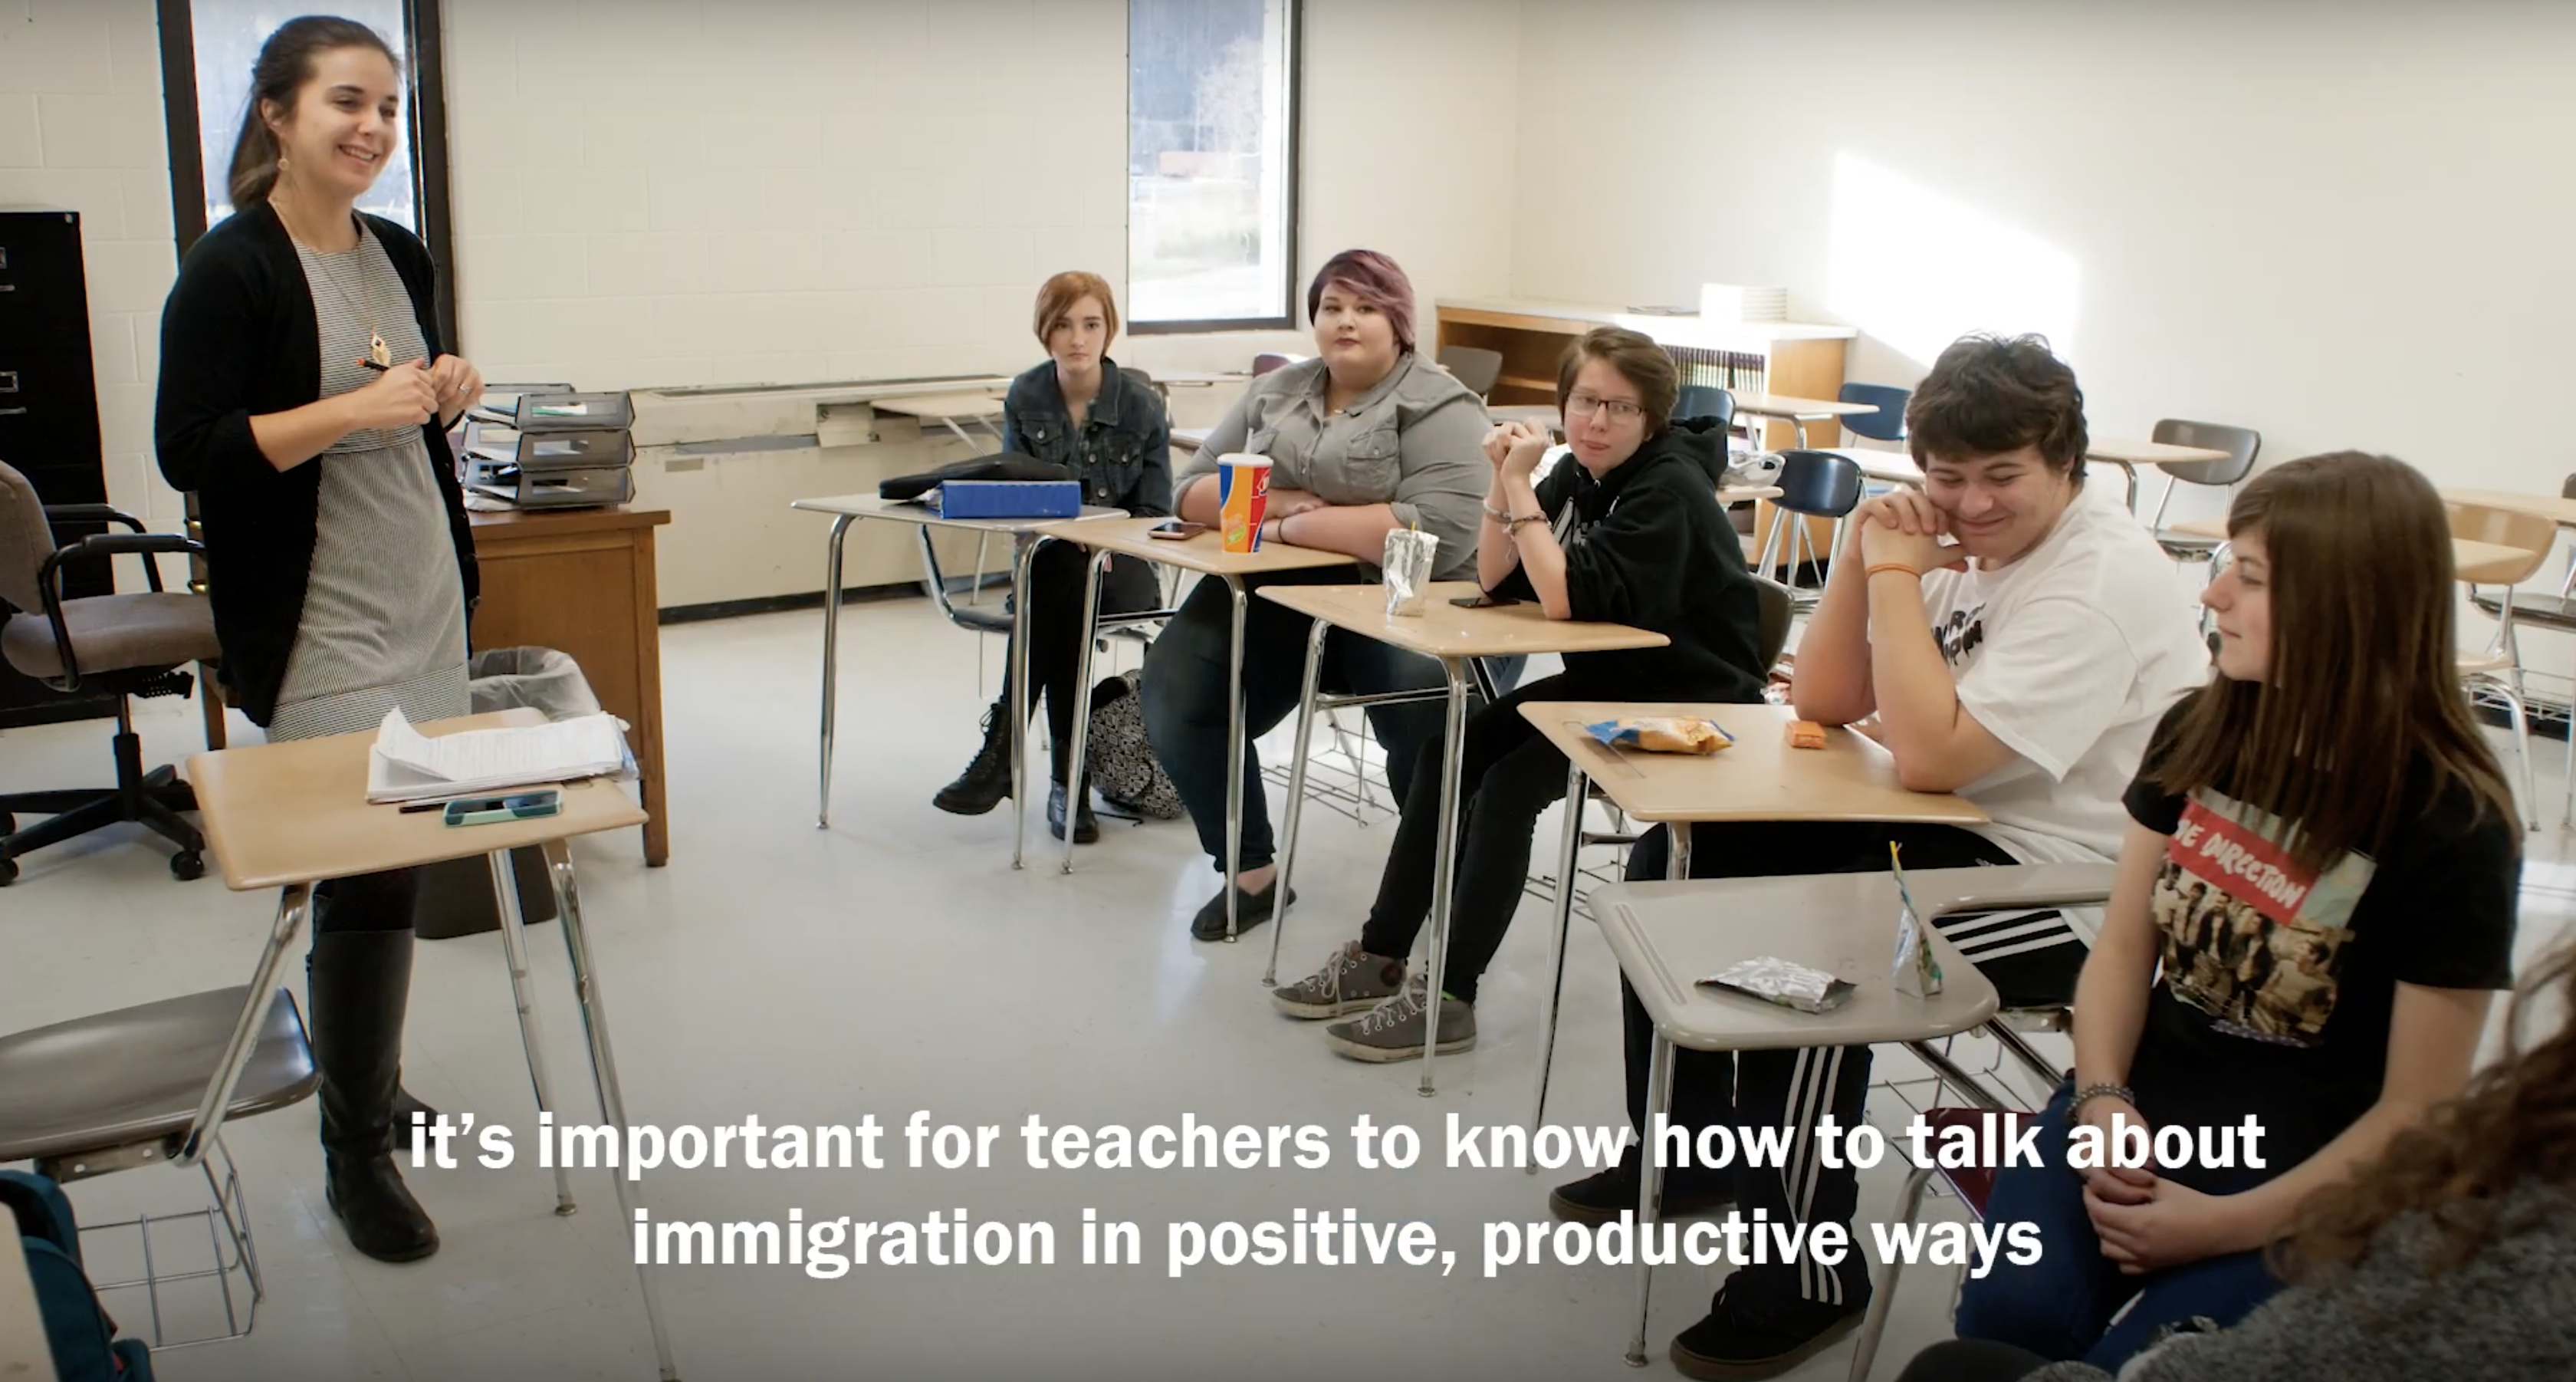 4 tips for talking about immigration in the classroom